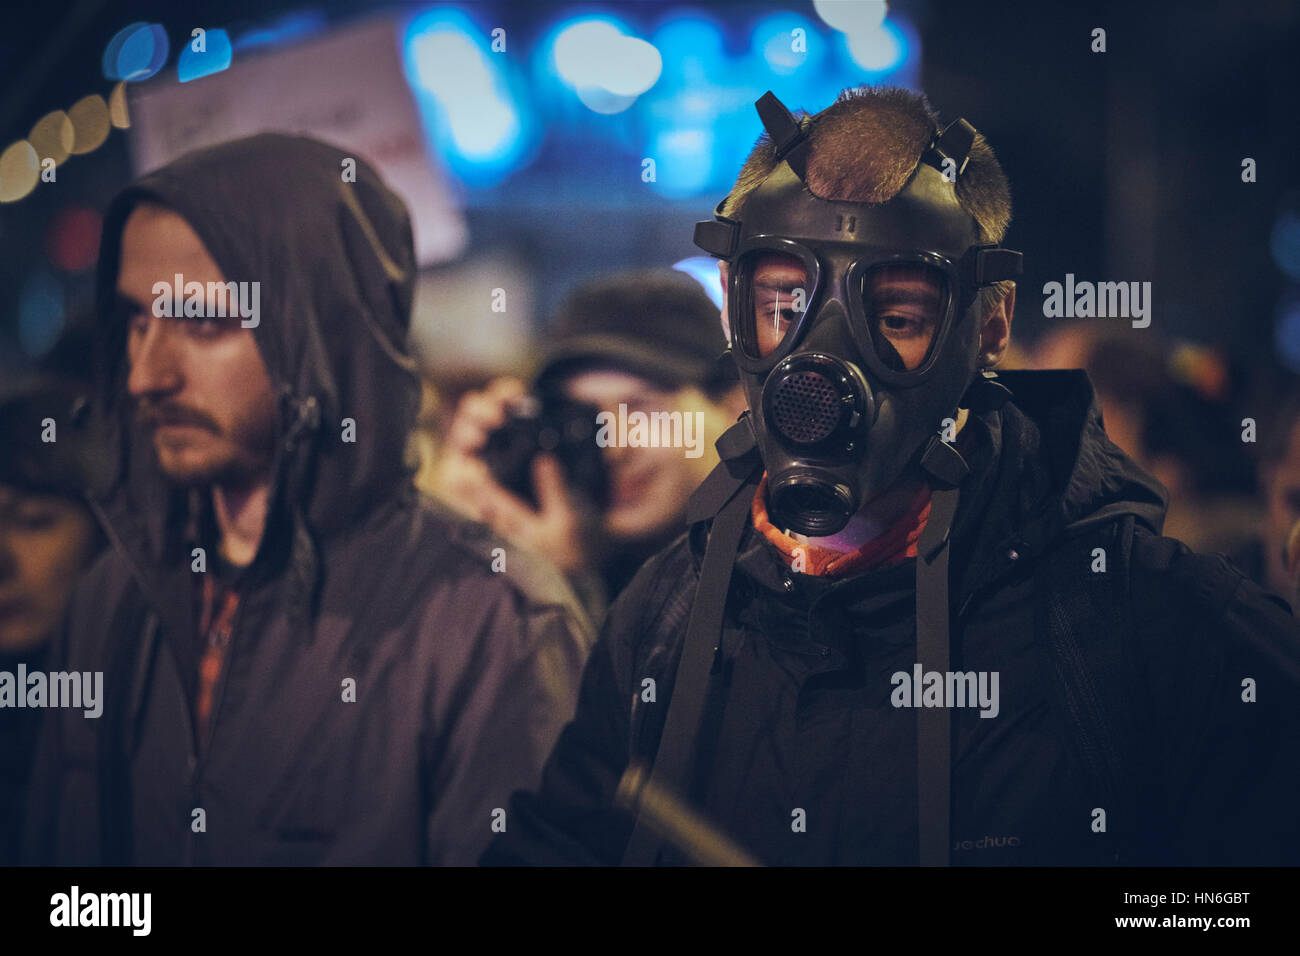 Bucharest, Romania - October 6, 2013: Young man wears gas mask as a protest against the toxic cyanide gold extraction in Rosia Montana, Romania. Stock Photo